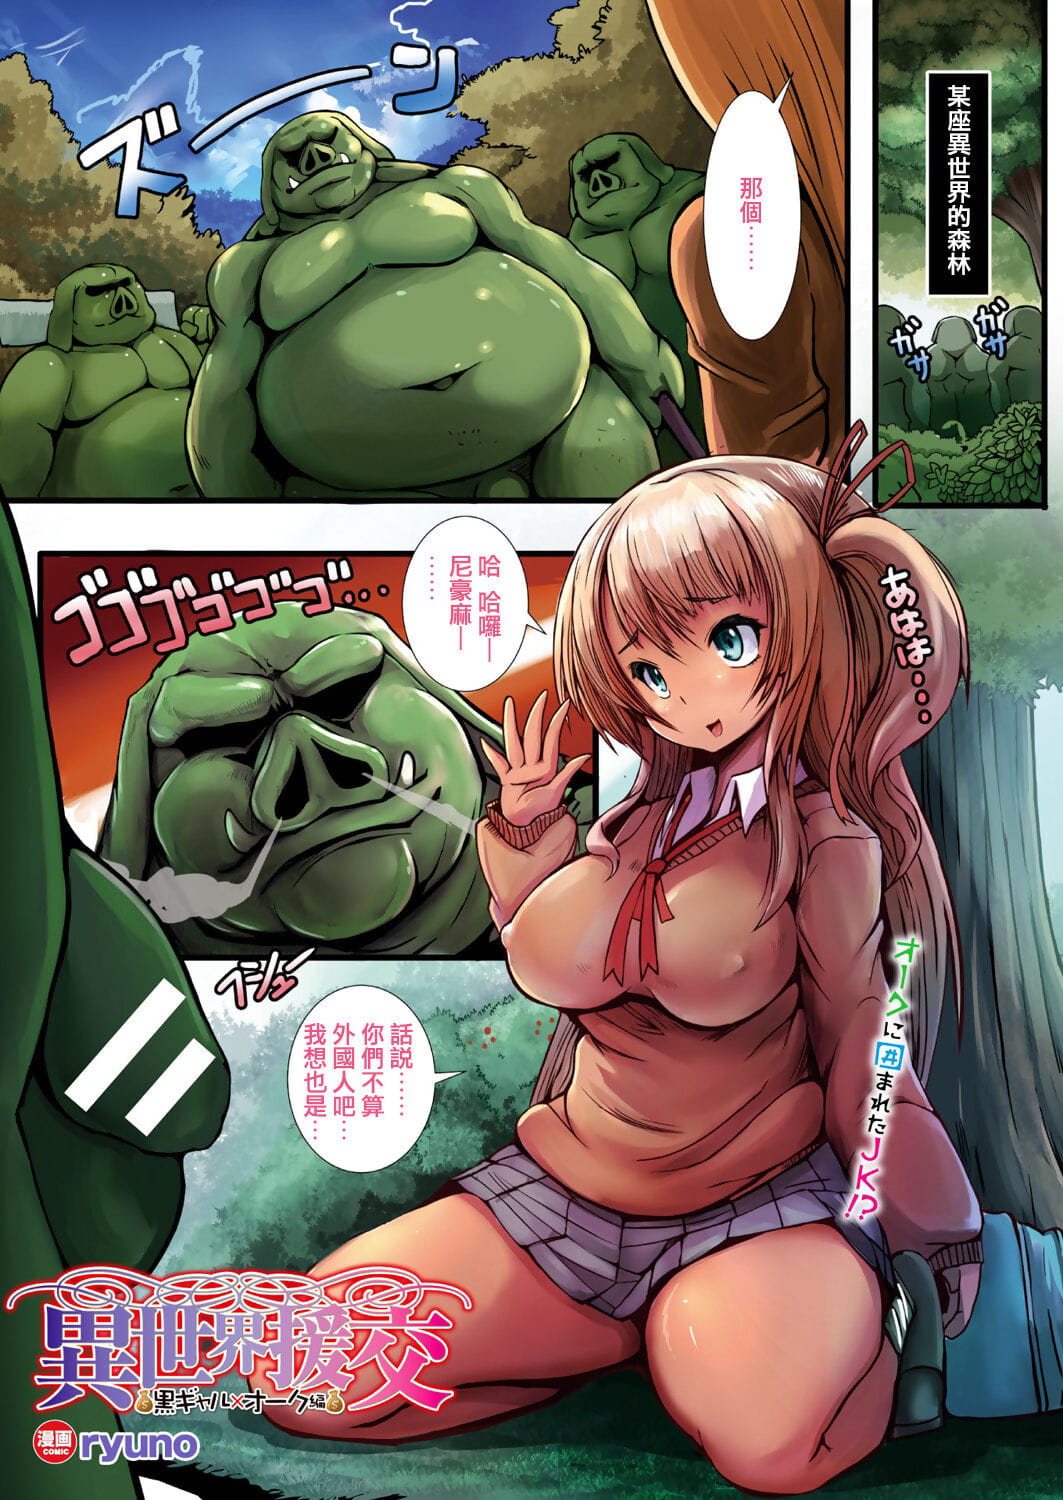 Isekai Enkou ~Kuro Gal x Orc Hen~ - Parallel World Date Compensation ~Dark Tanned Girl x Orc edition~ page 1